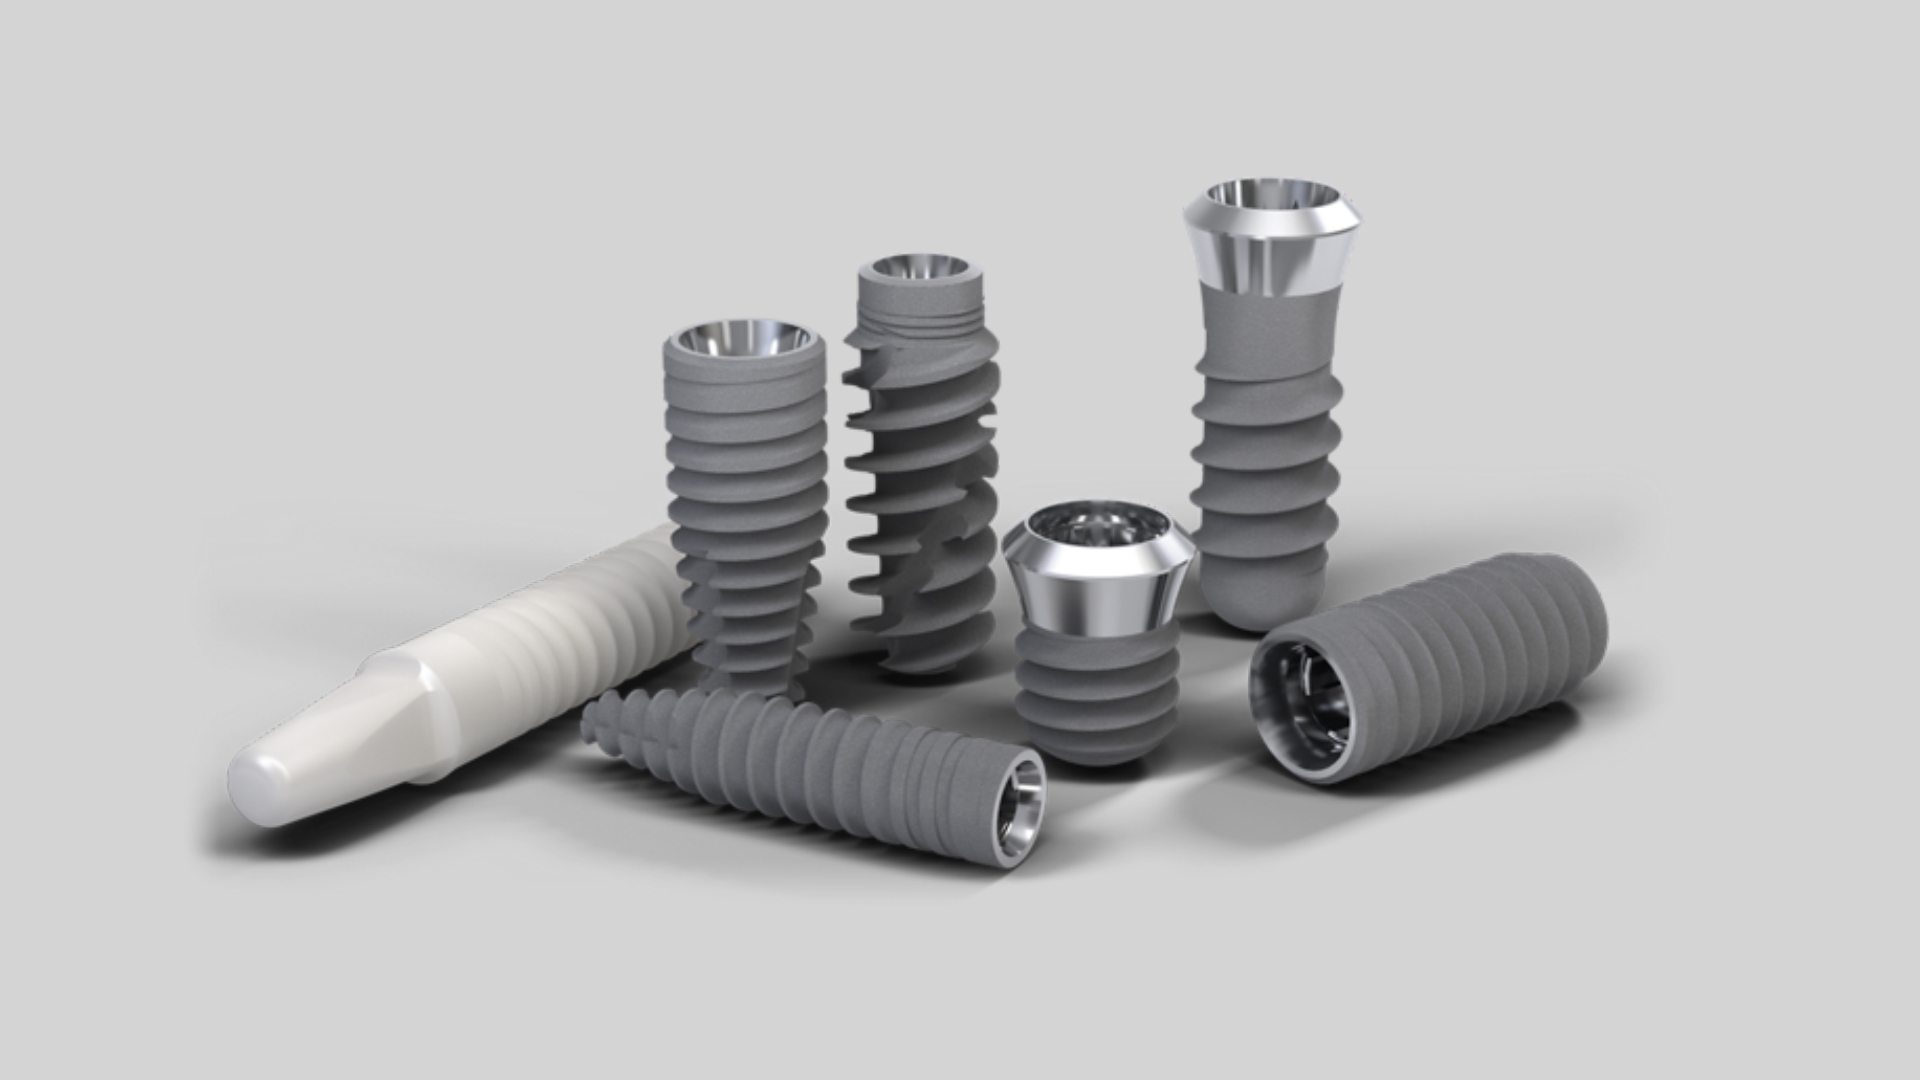 Component abutments of dental implants of various brands and materials